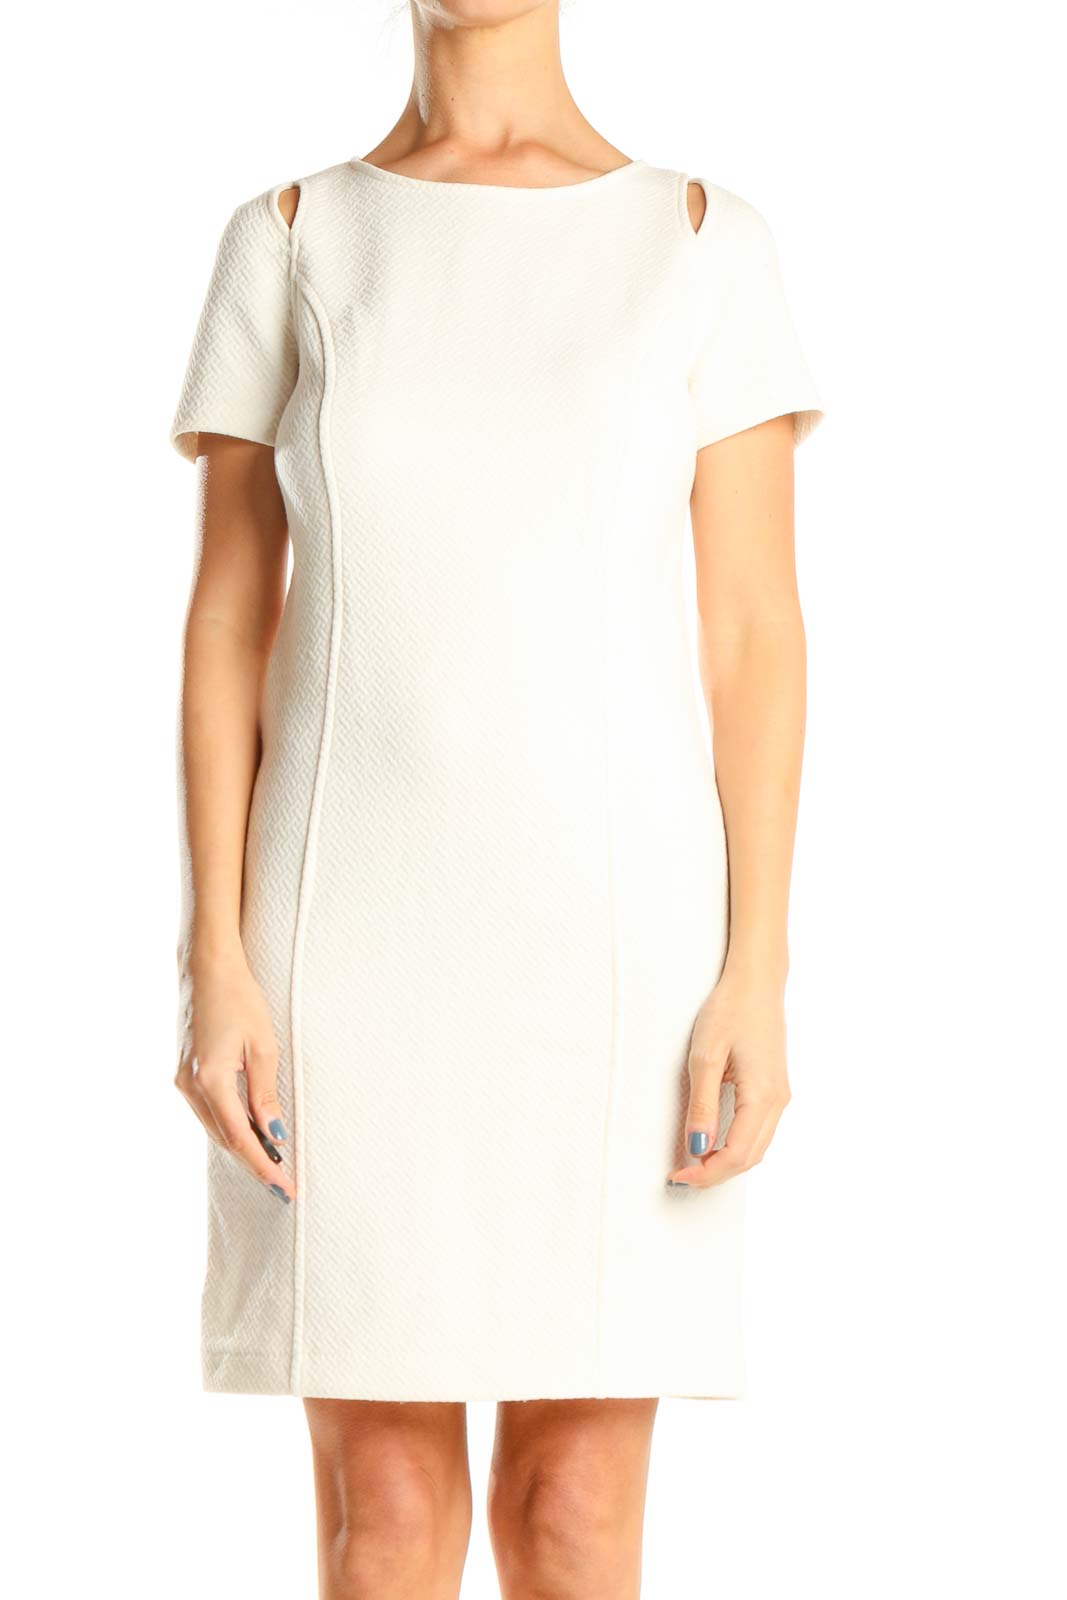 White Textured Classic Shift Dress Front